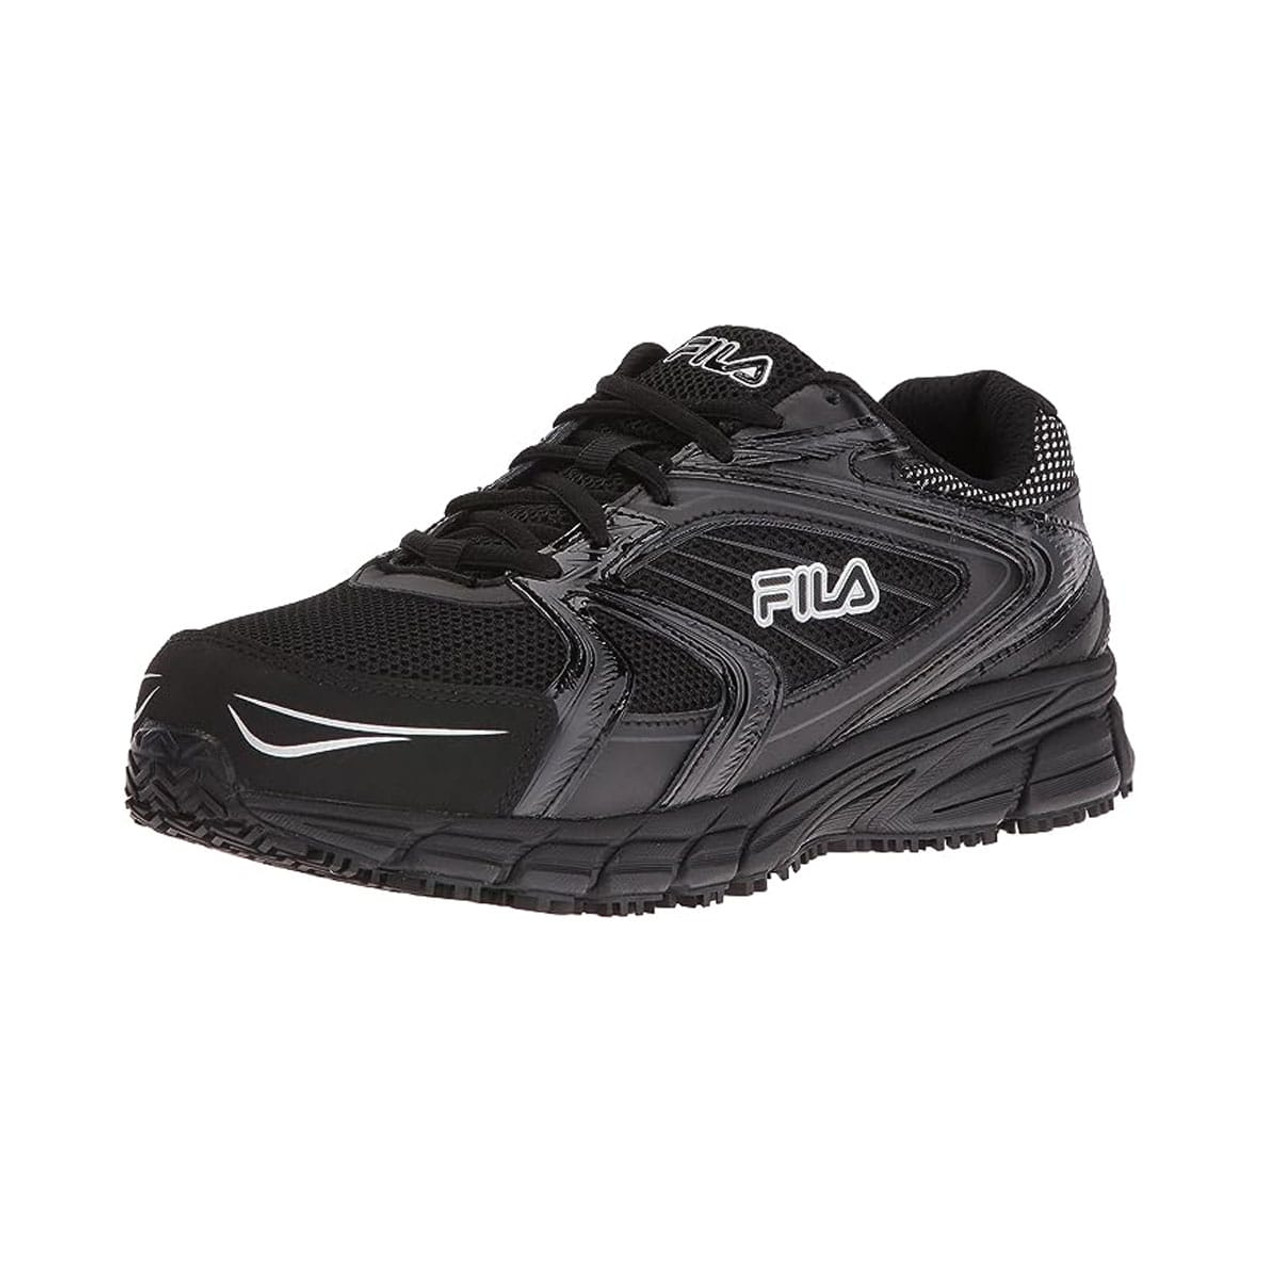 9 Best Retro Fila Sneakers to Shop Now for Men